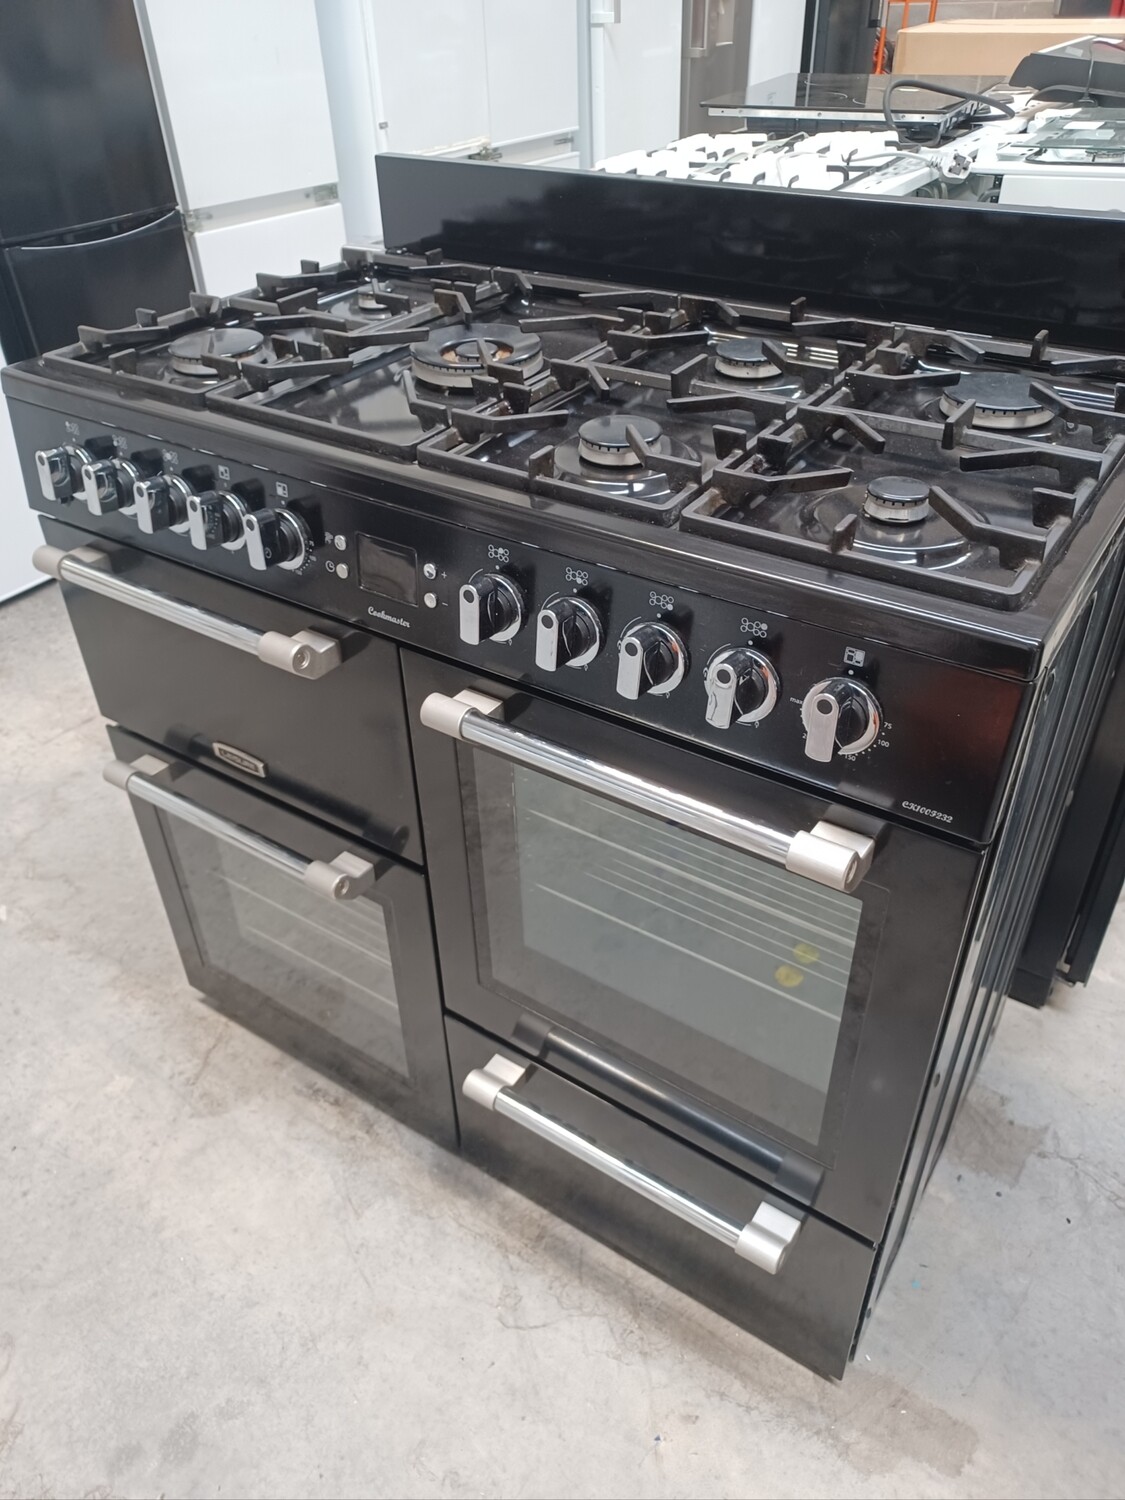 Leisure Cookmaster 100cm 7 Burner Freestanding Dual Fuel Cooker 2 Ovens Grill and Pan Store Refurbished 